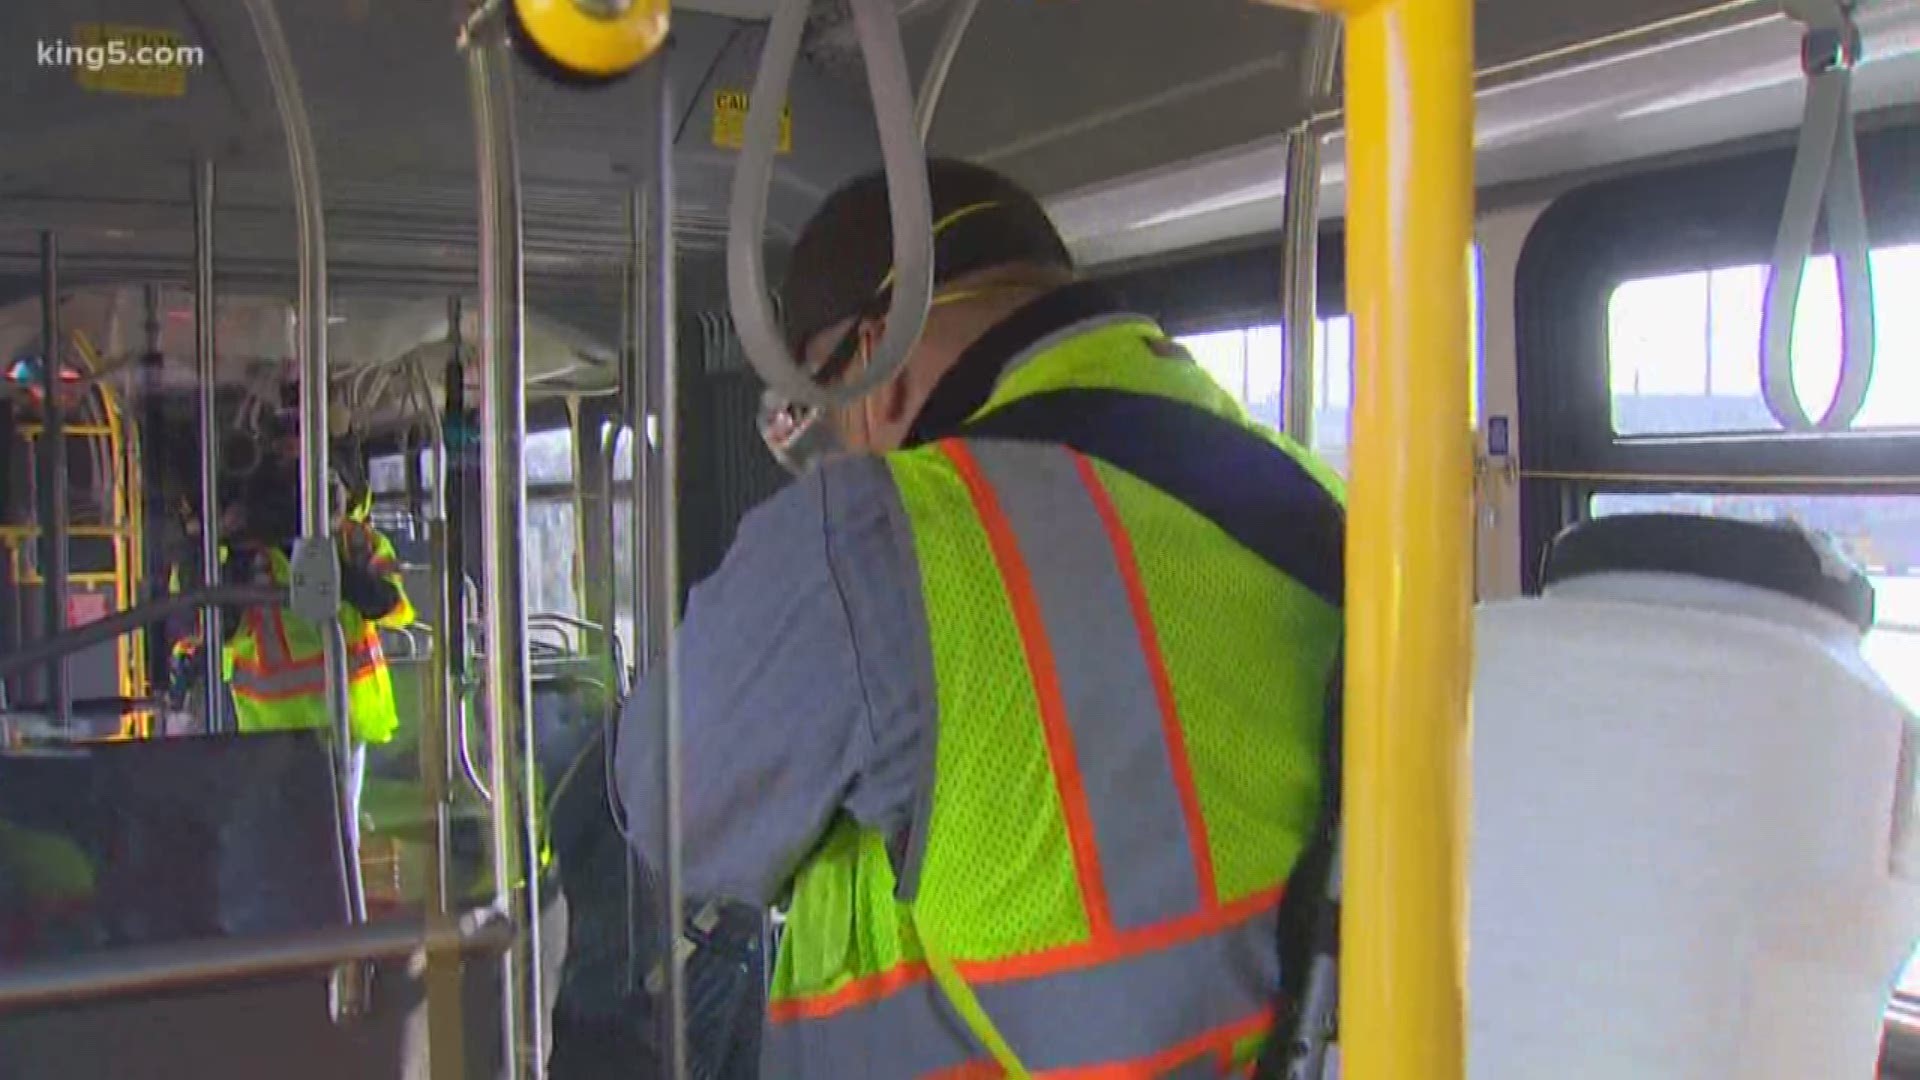 Crews have been hard at work spraying disinfectant on all city buses to keep riders safe from coronavirus.